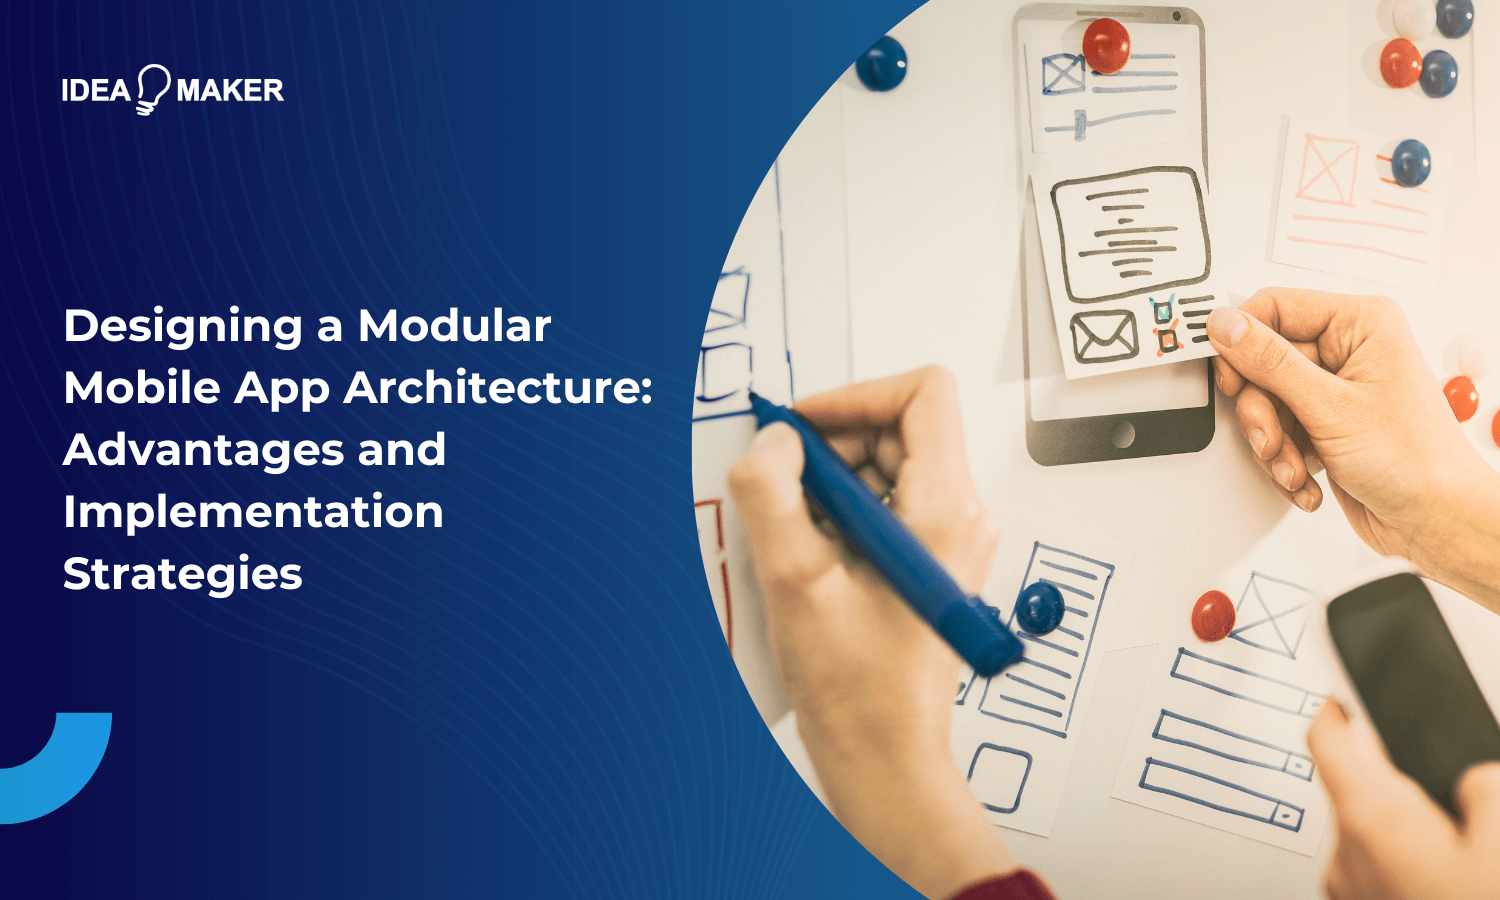 Designing a Modular Mobile App Architecture Advantages and Implementation Strategies